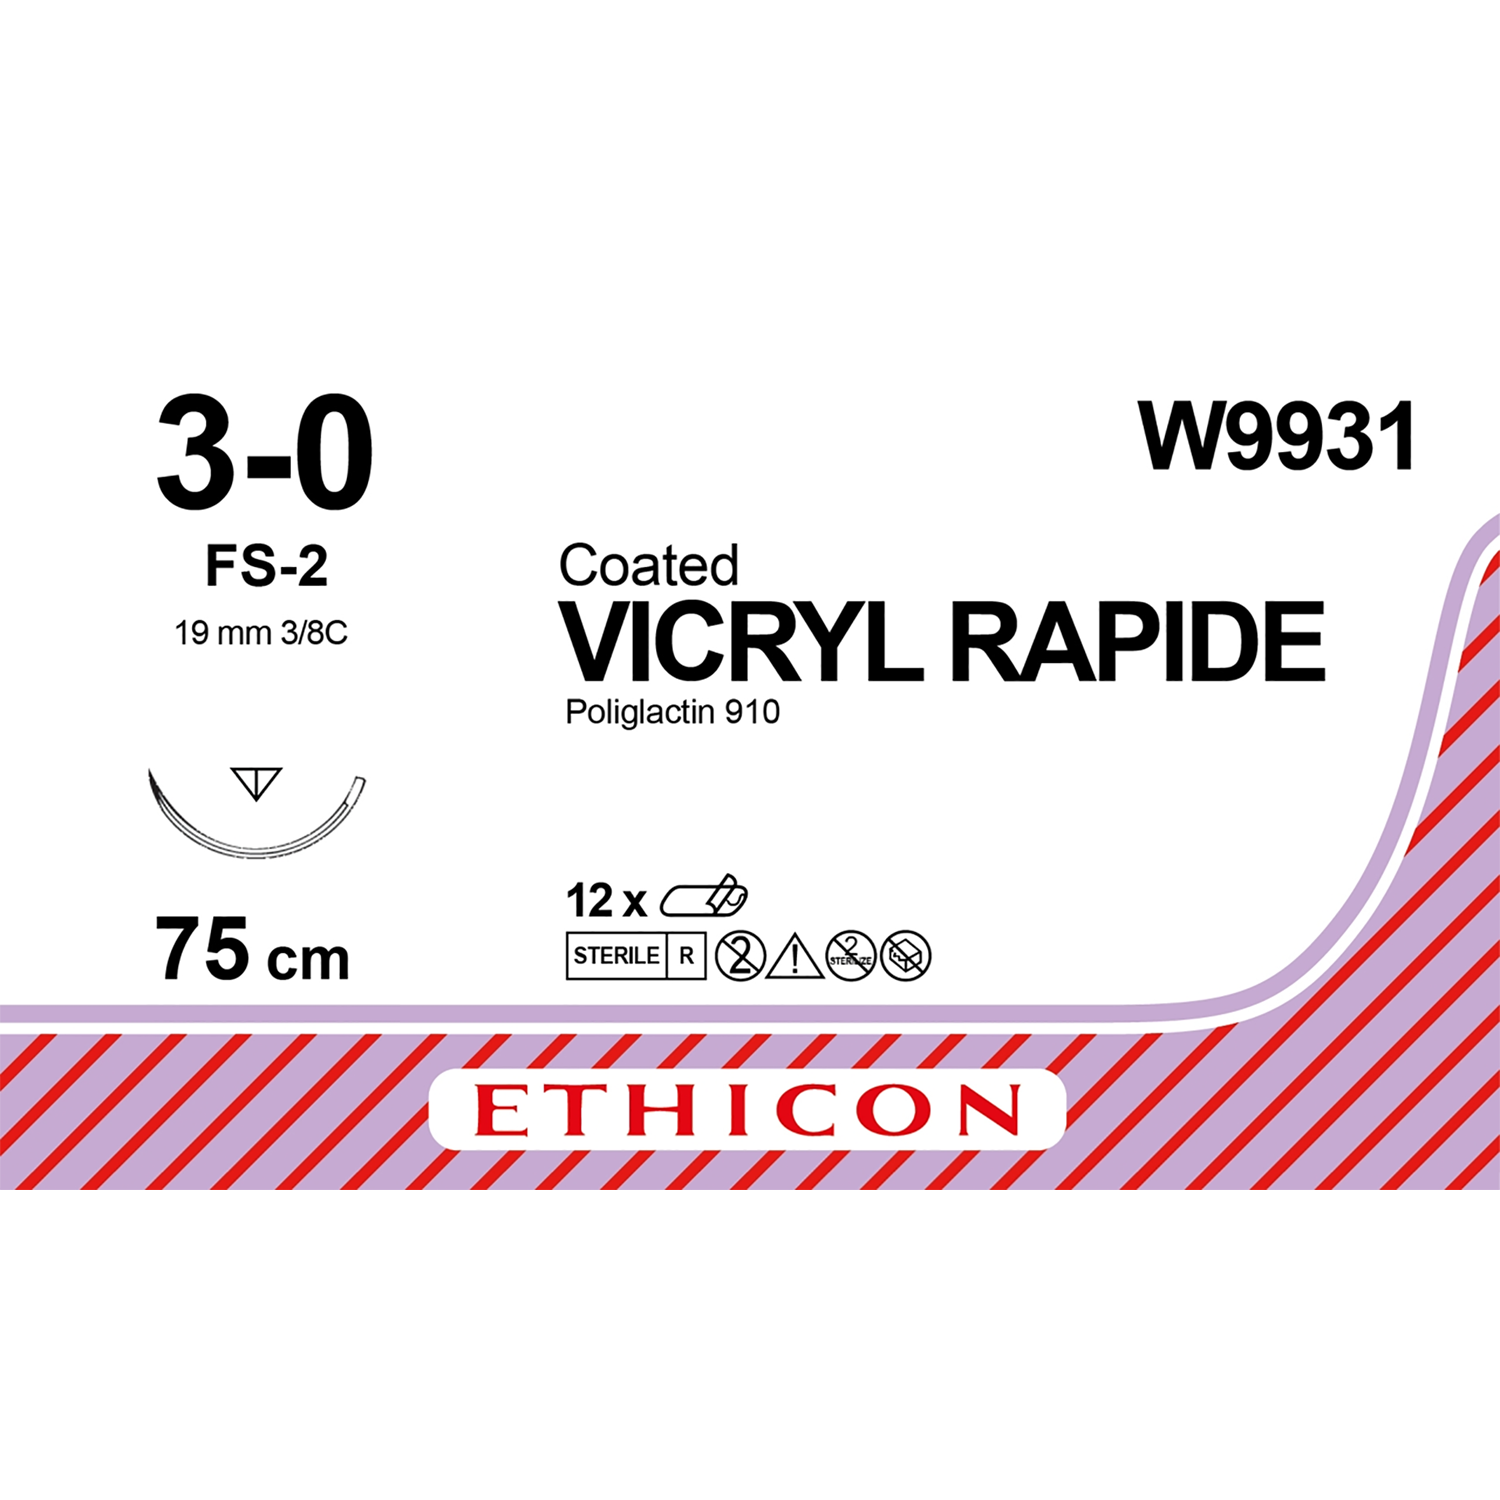 Ethicon Vicryl Rapide Suture | Absorbable | Undyed | Size: 3-0 | Length: 75cm | Needle: FS-2 | Pack of 12